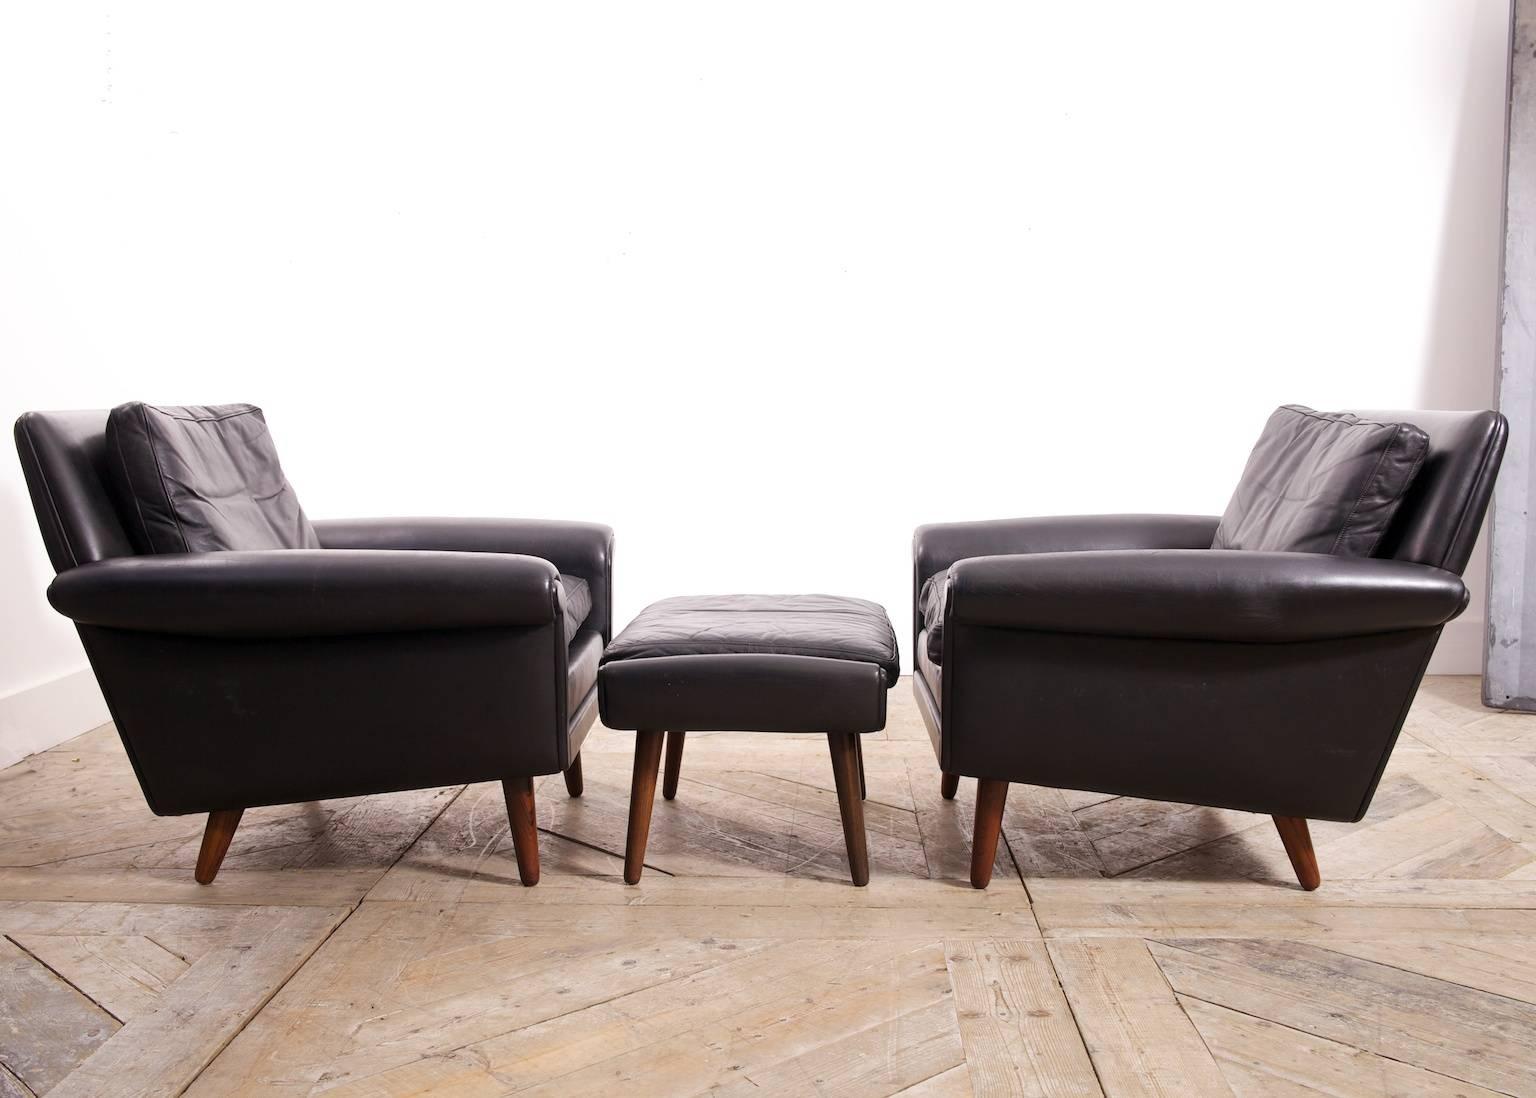 A pair of black leather armchairs with ottoman en suite.

Designer Aage Christiansen for the Diplomat range by Erhardsen & Andersen, 1965.

Superb quality, down cushions and raised on solid rosewood tapering legs.

Price is for the set ( two chairs